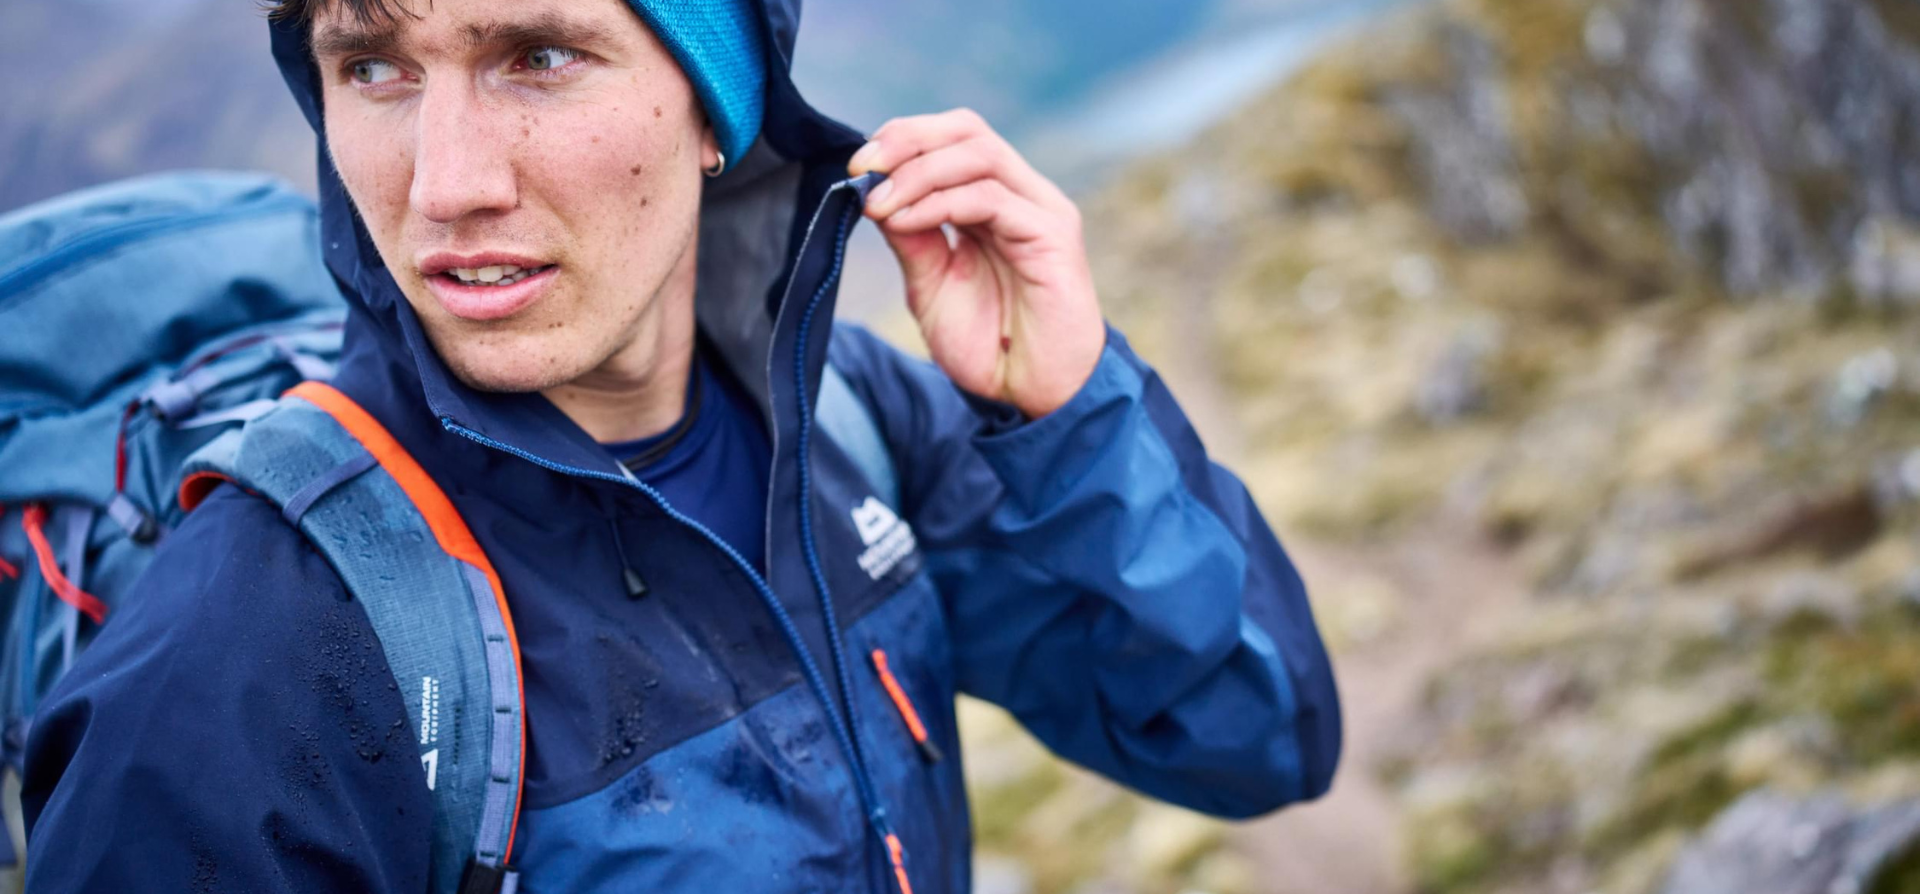 How to repair your GORE-TEX jacket